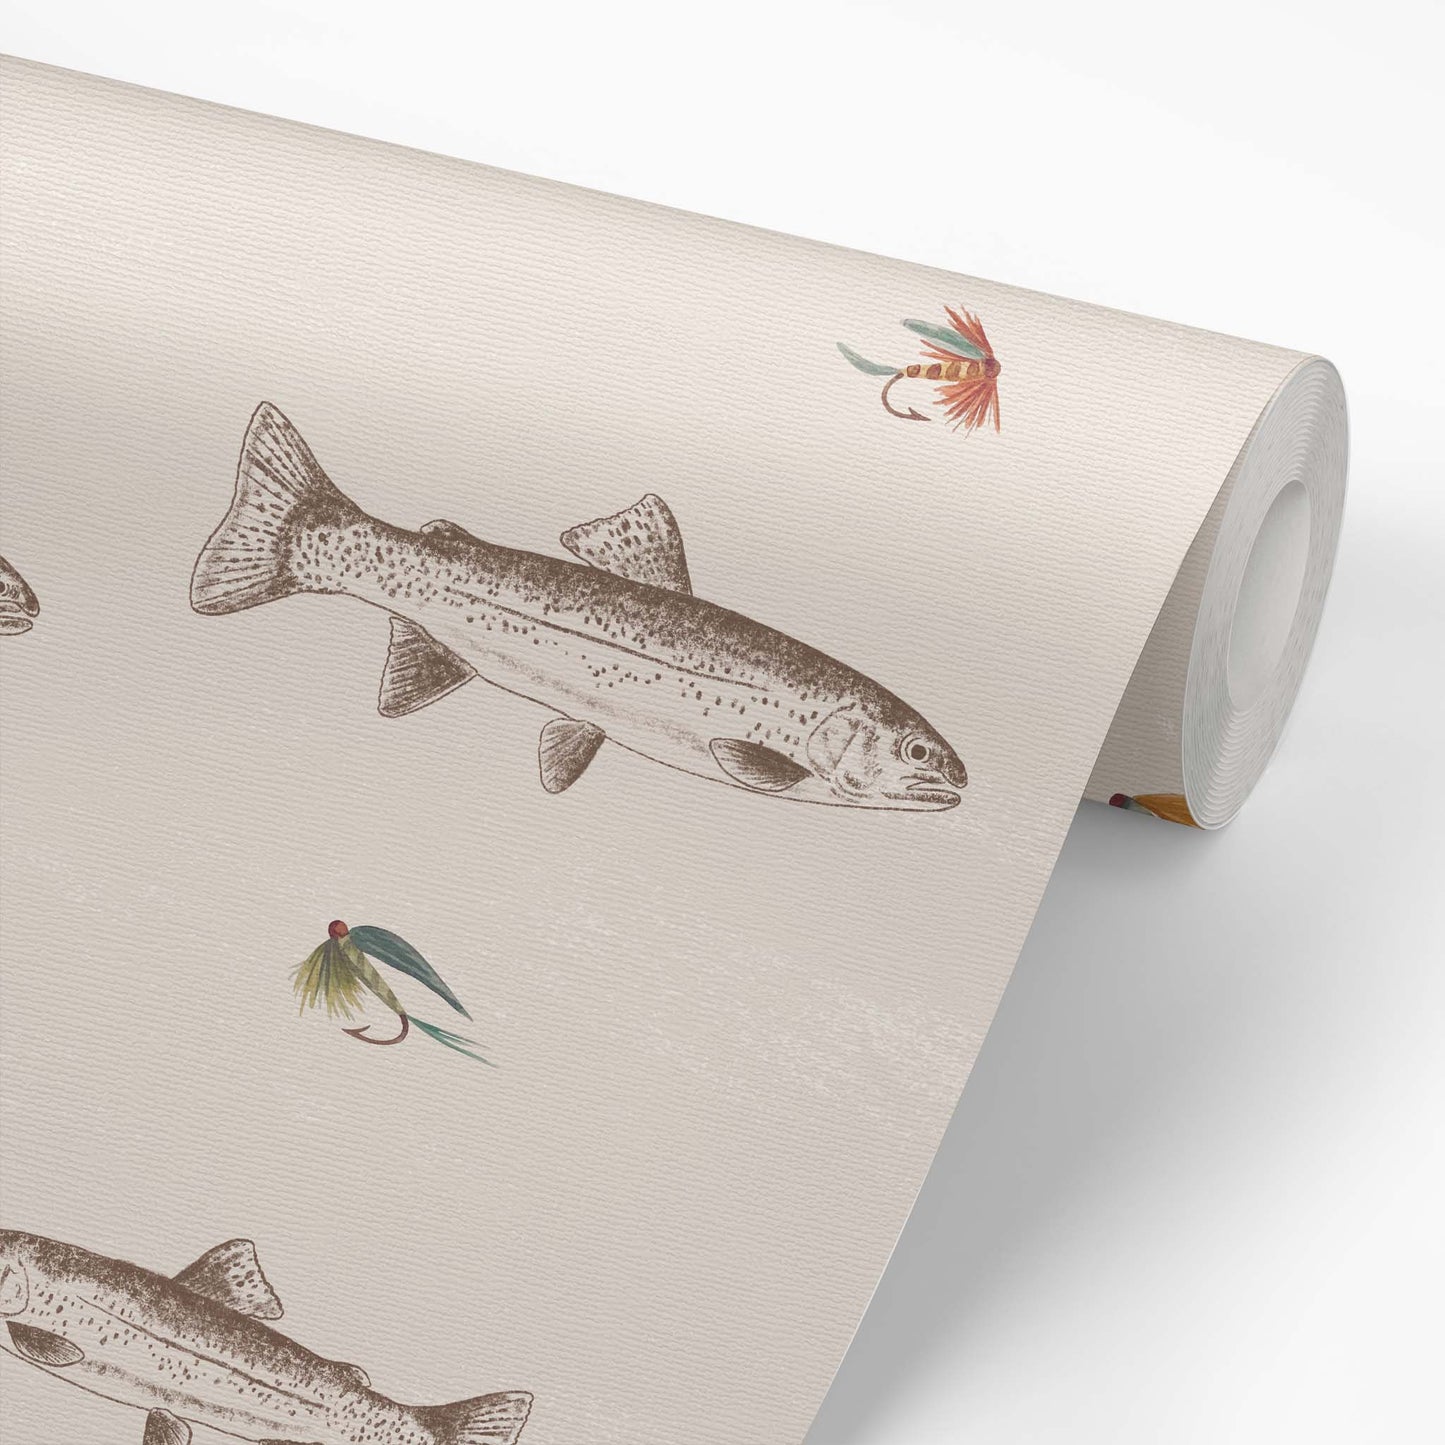 This wallpaper roll shows our Fly Fishing Wallpaper in Brown. This peel and stick, removable wallpaper was designed by artist Mariah Cottrell and features trout and flies for a calm river scene.